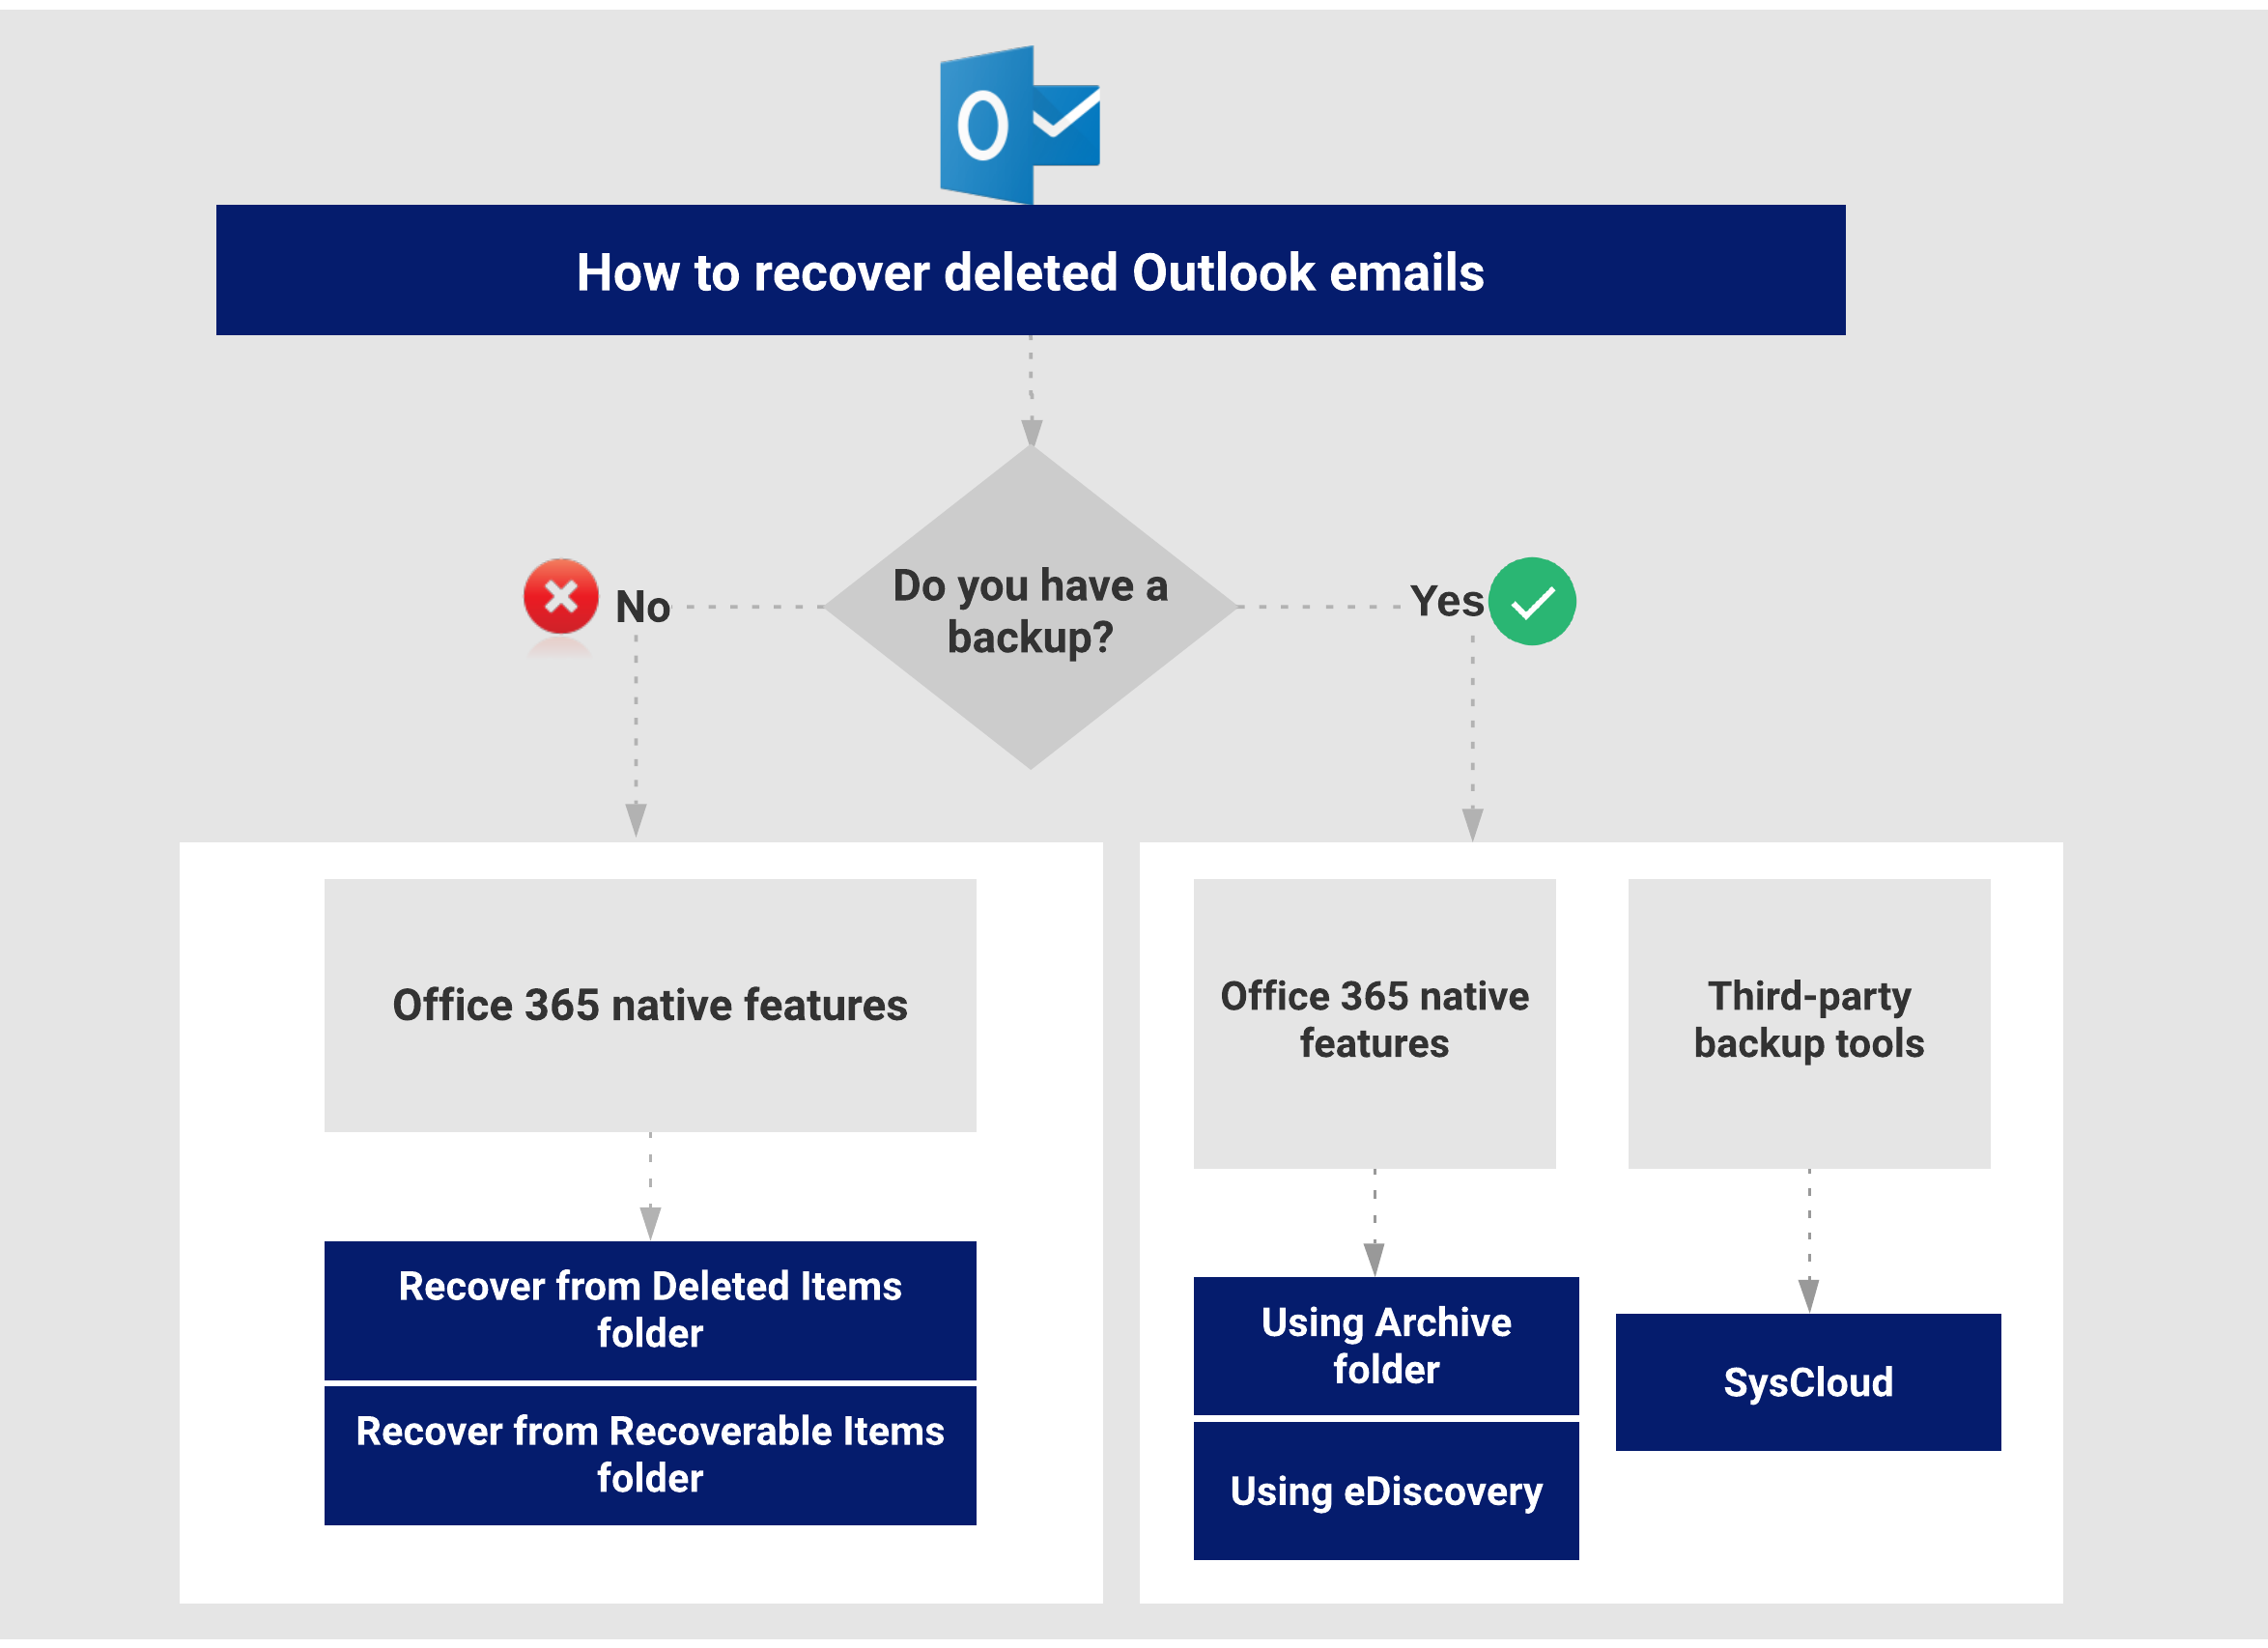 recover deleted folder in outlook